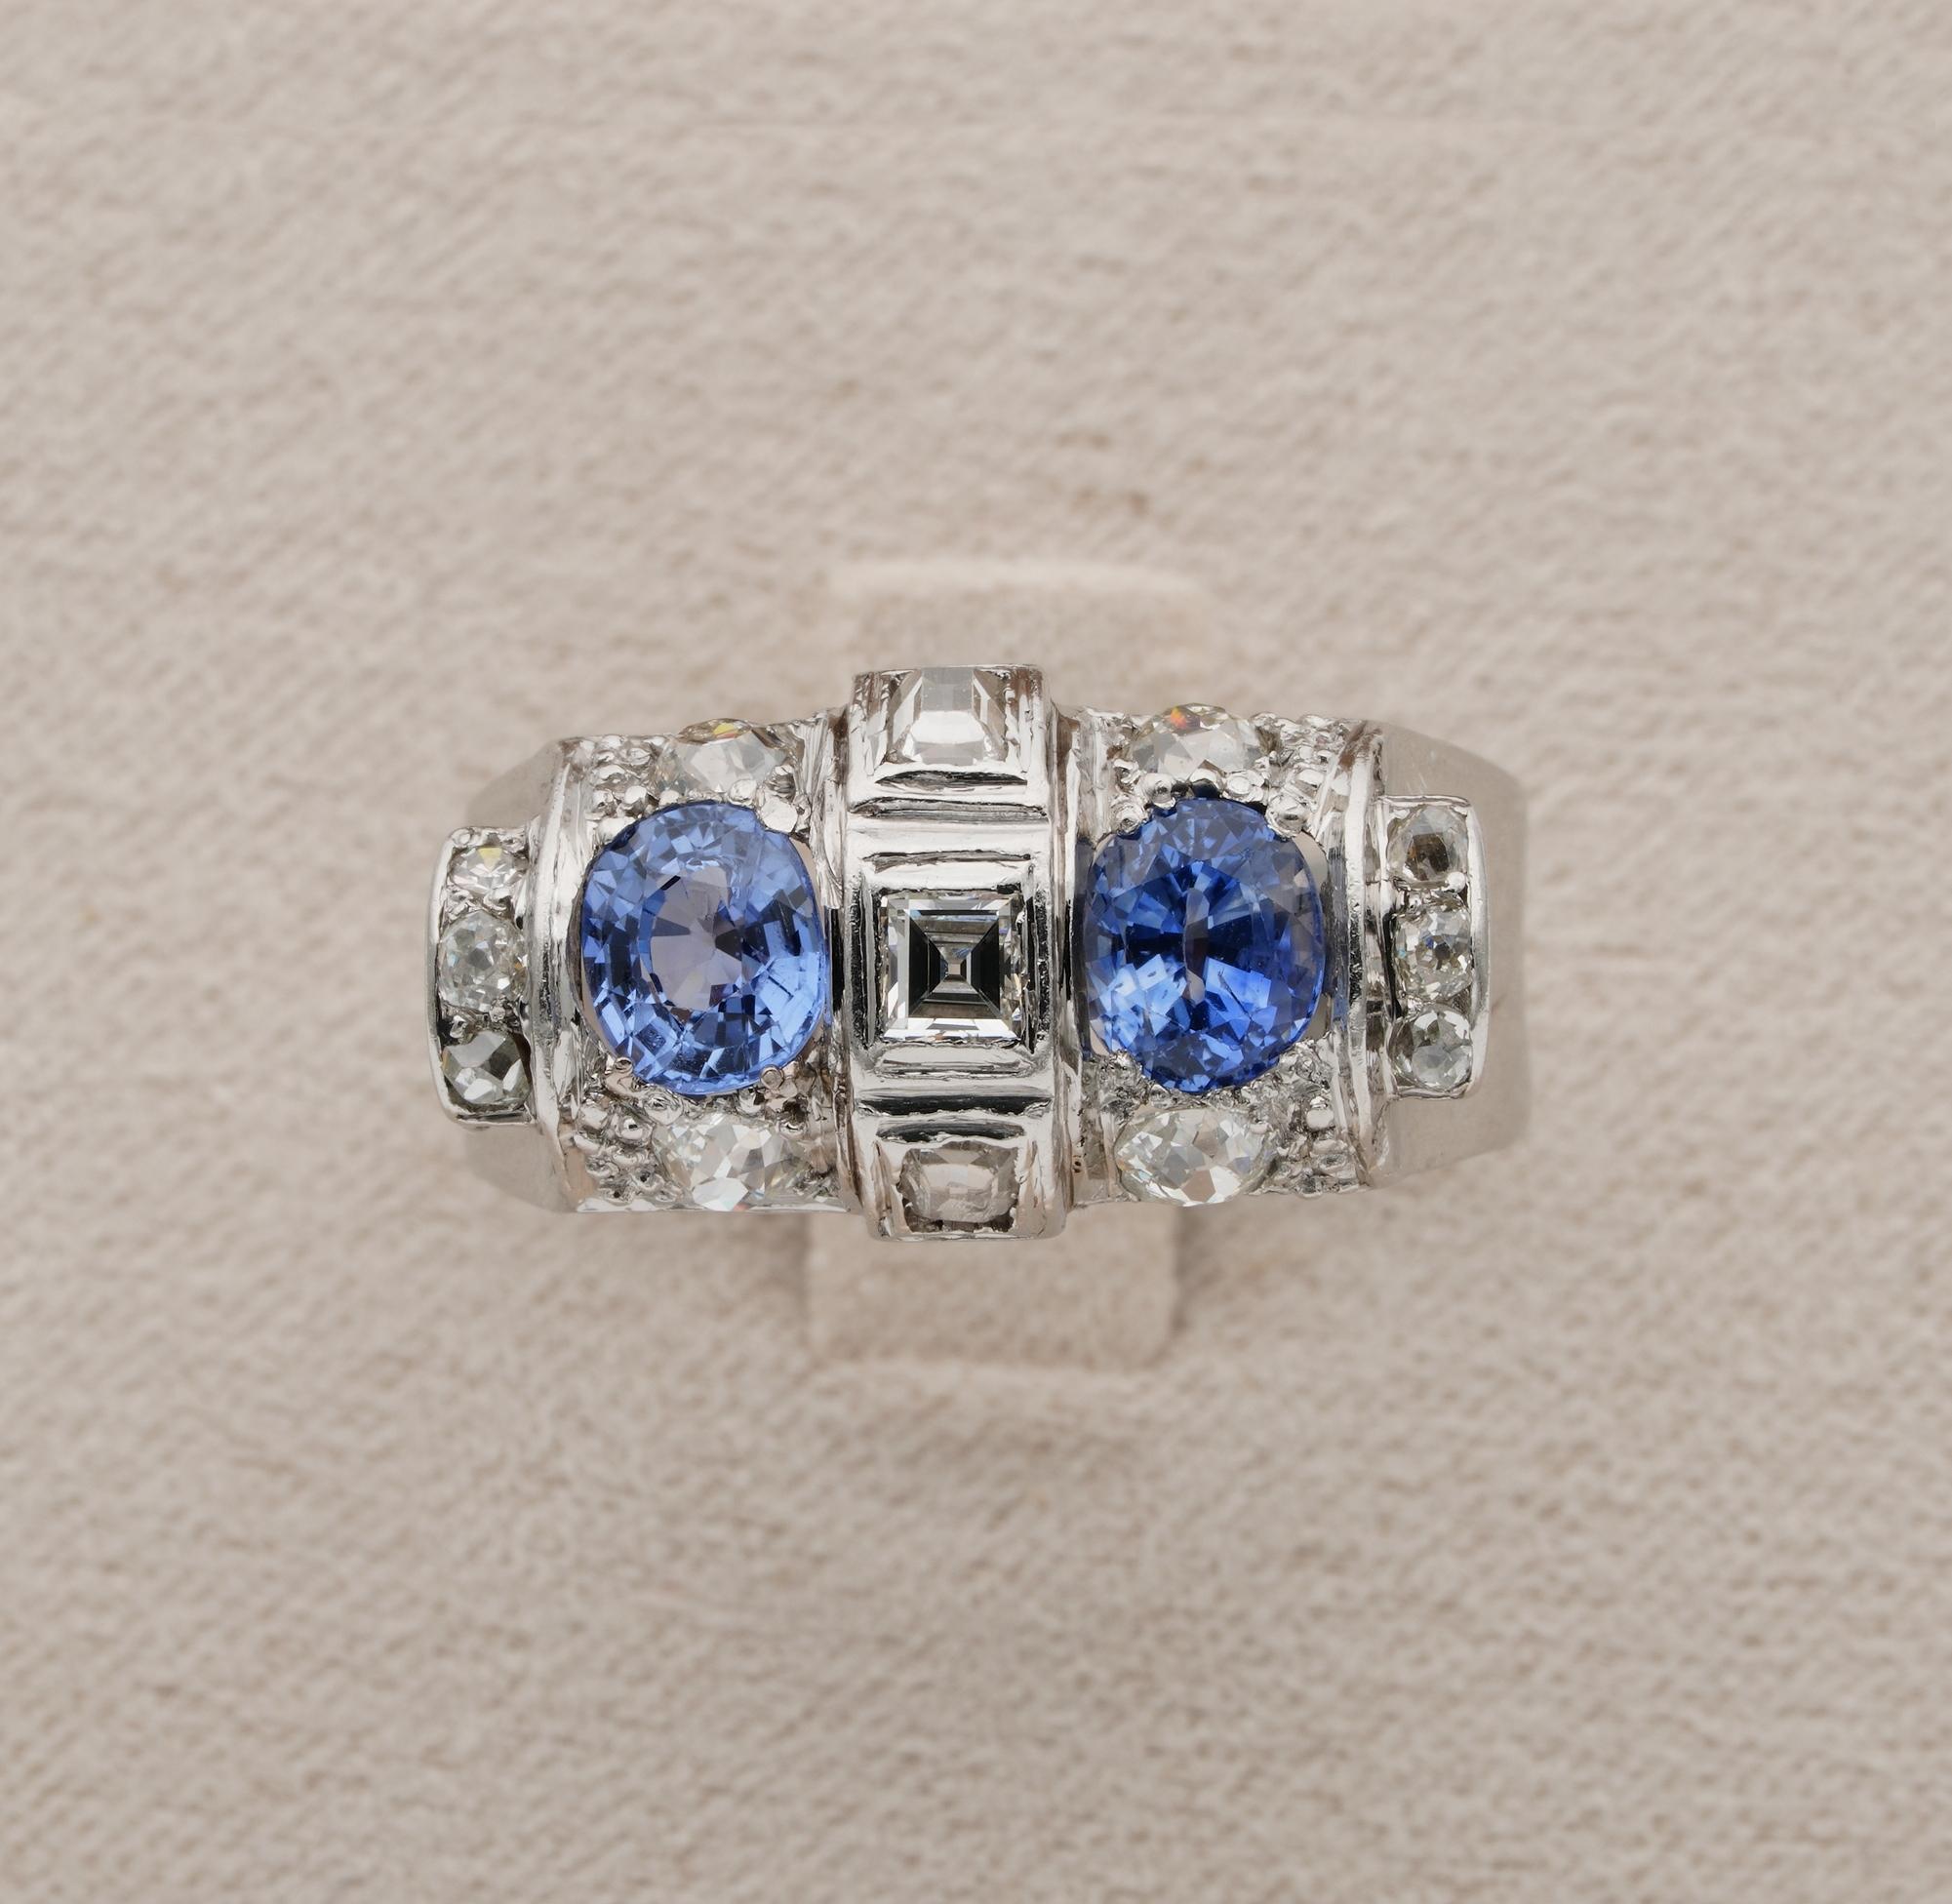 Art Deco Beauty!

Rare & ravishing original Art Deco dazzler
Distinctive designed of the era structured by a play between Diamonds and Natural sapphires as result of radiance effect upon a geometric intricate artwork
Ring has been hand crafted from